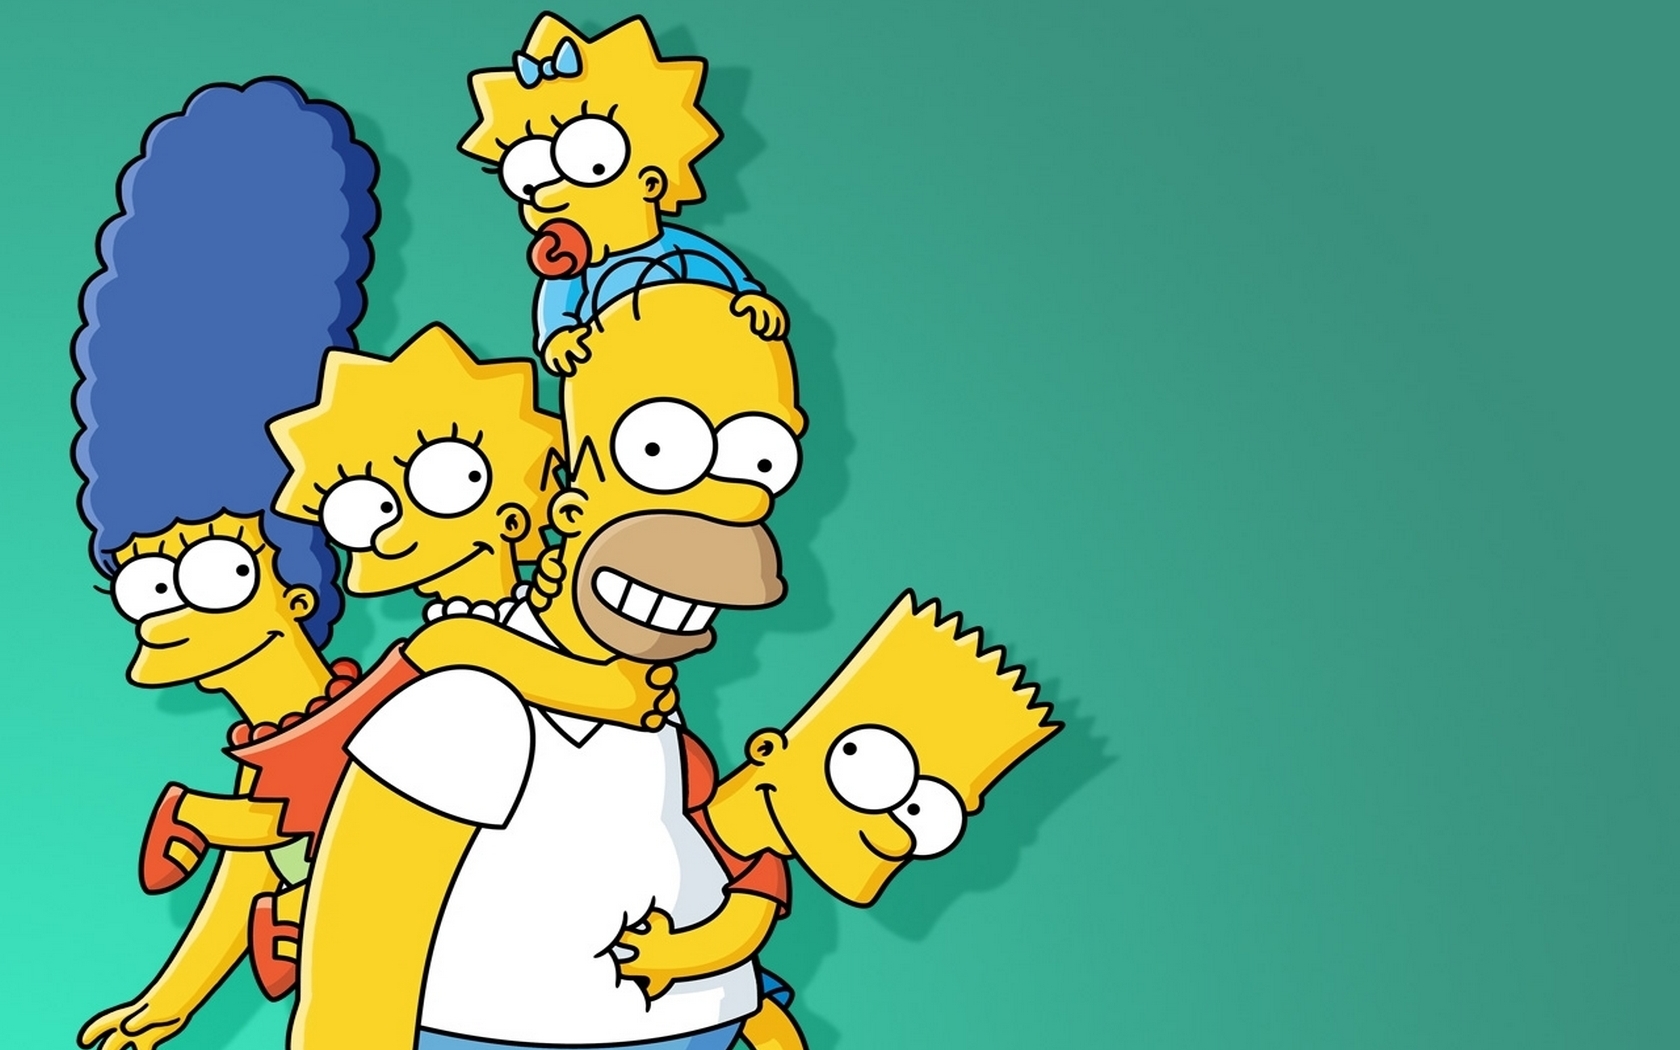 Simpsons Hd Wallpaper - HD Wallpapers and Pictures